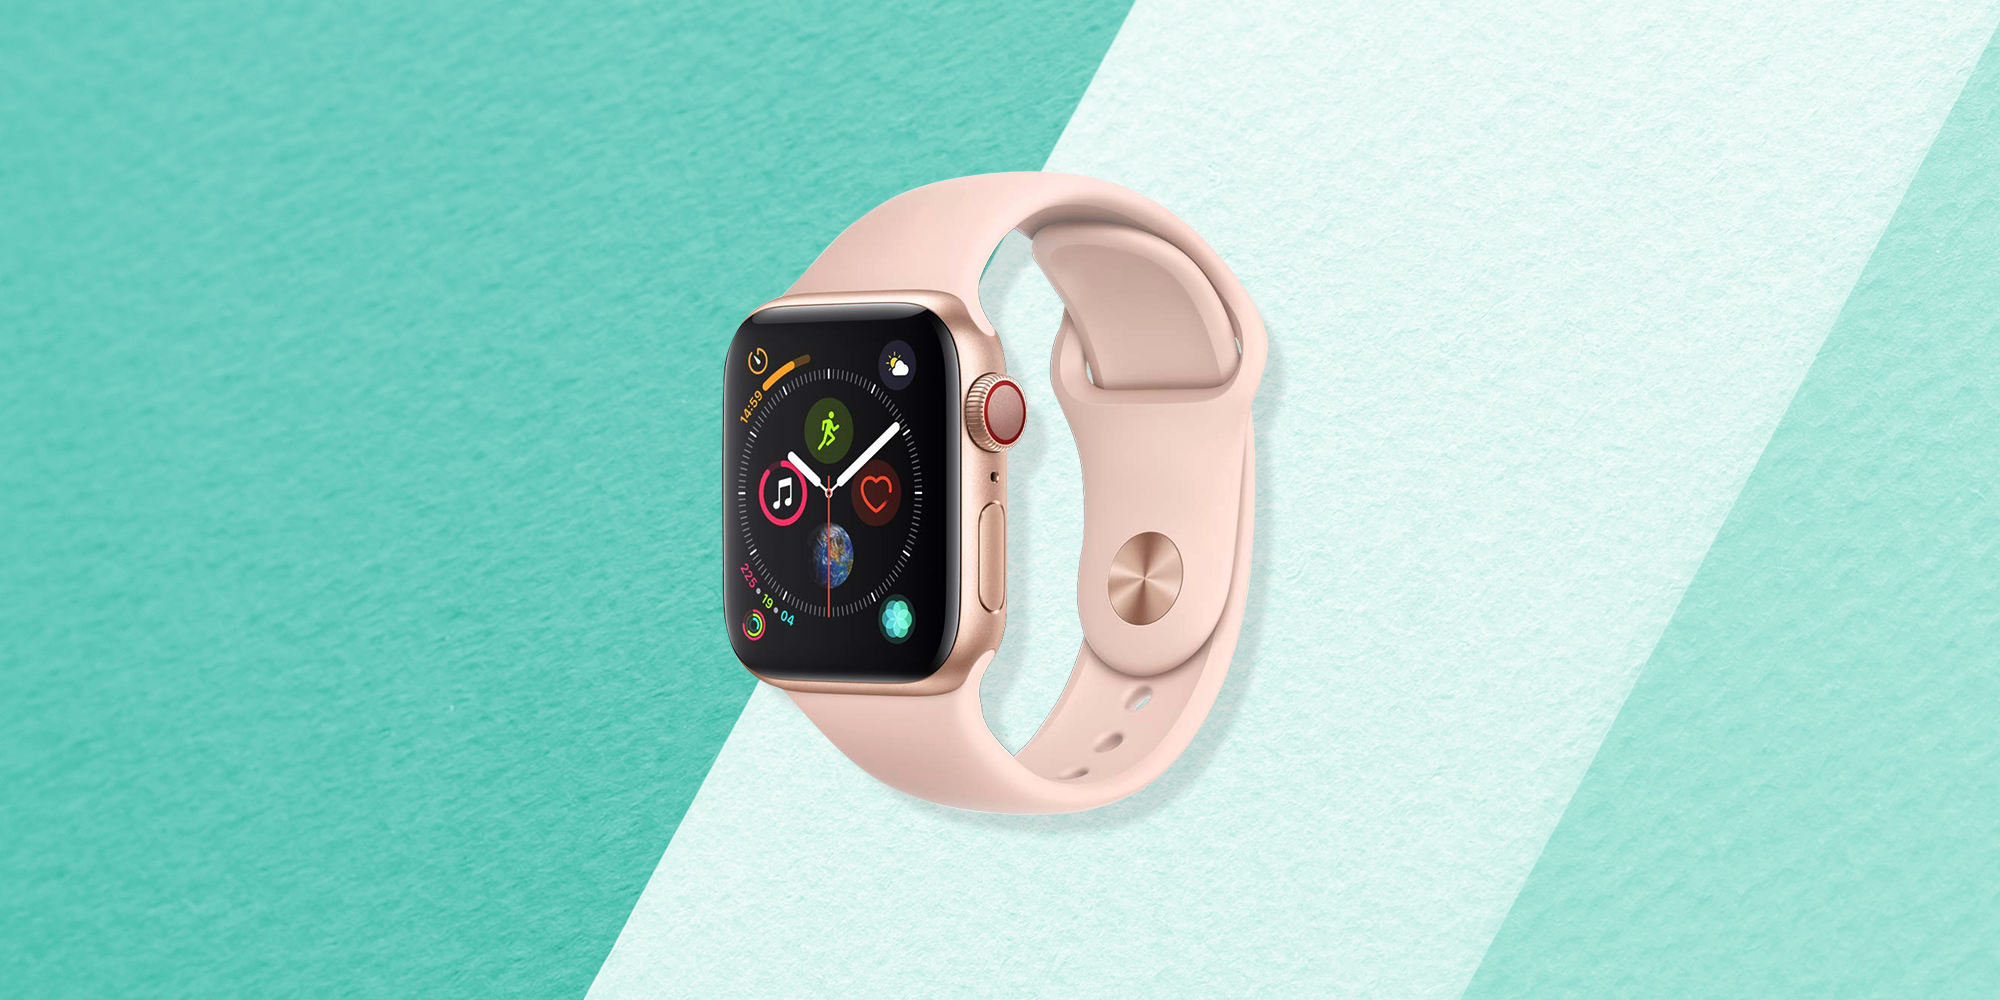 Apple Watch Series 4 Is On Sale For Up To 70 Off On Amazon Today